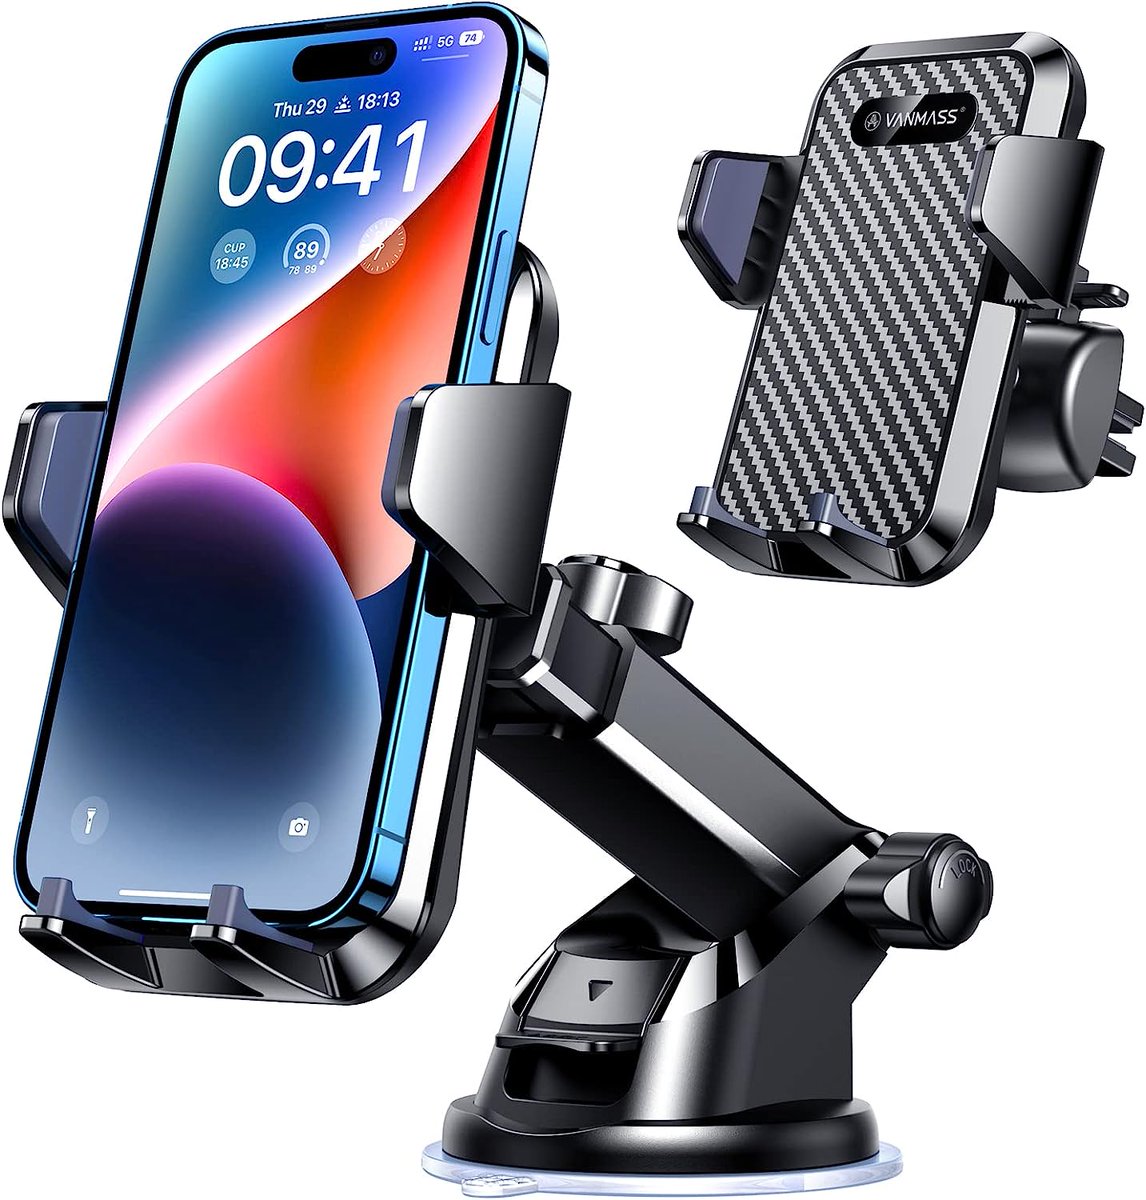 Best Mobile Phone Stand For The Car ~ Top Chosen for You! Read Full Review Here: topteneverworld.com/mobile-phone-s… #carphonestanding #carphonestandholder #carphonestandinlagos #phonestand #phonestand #ThursdayThoughts #pope #Lola #Warner #phoebetonkin